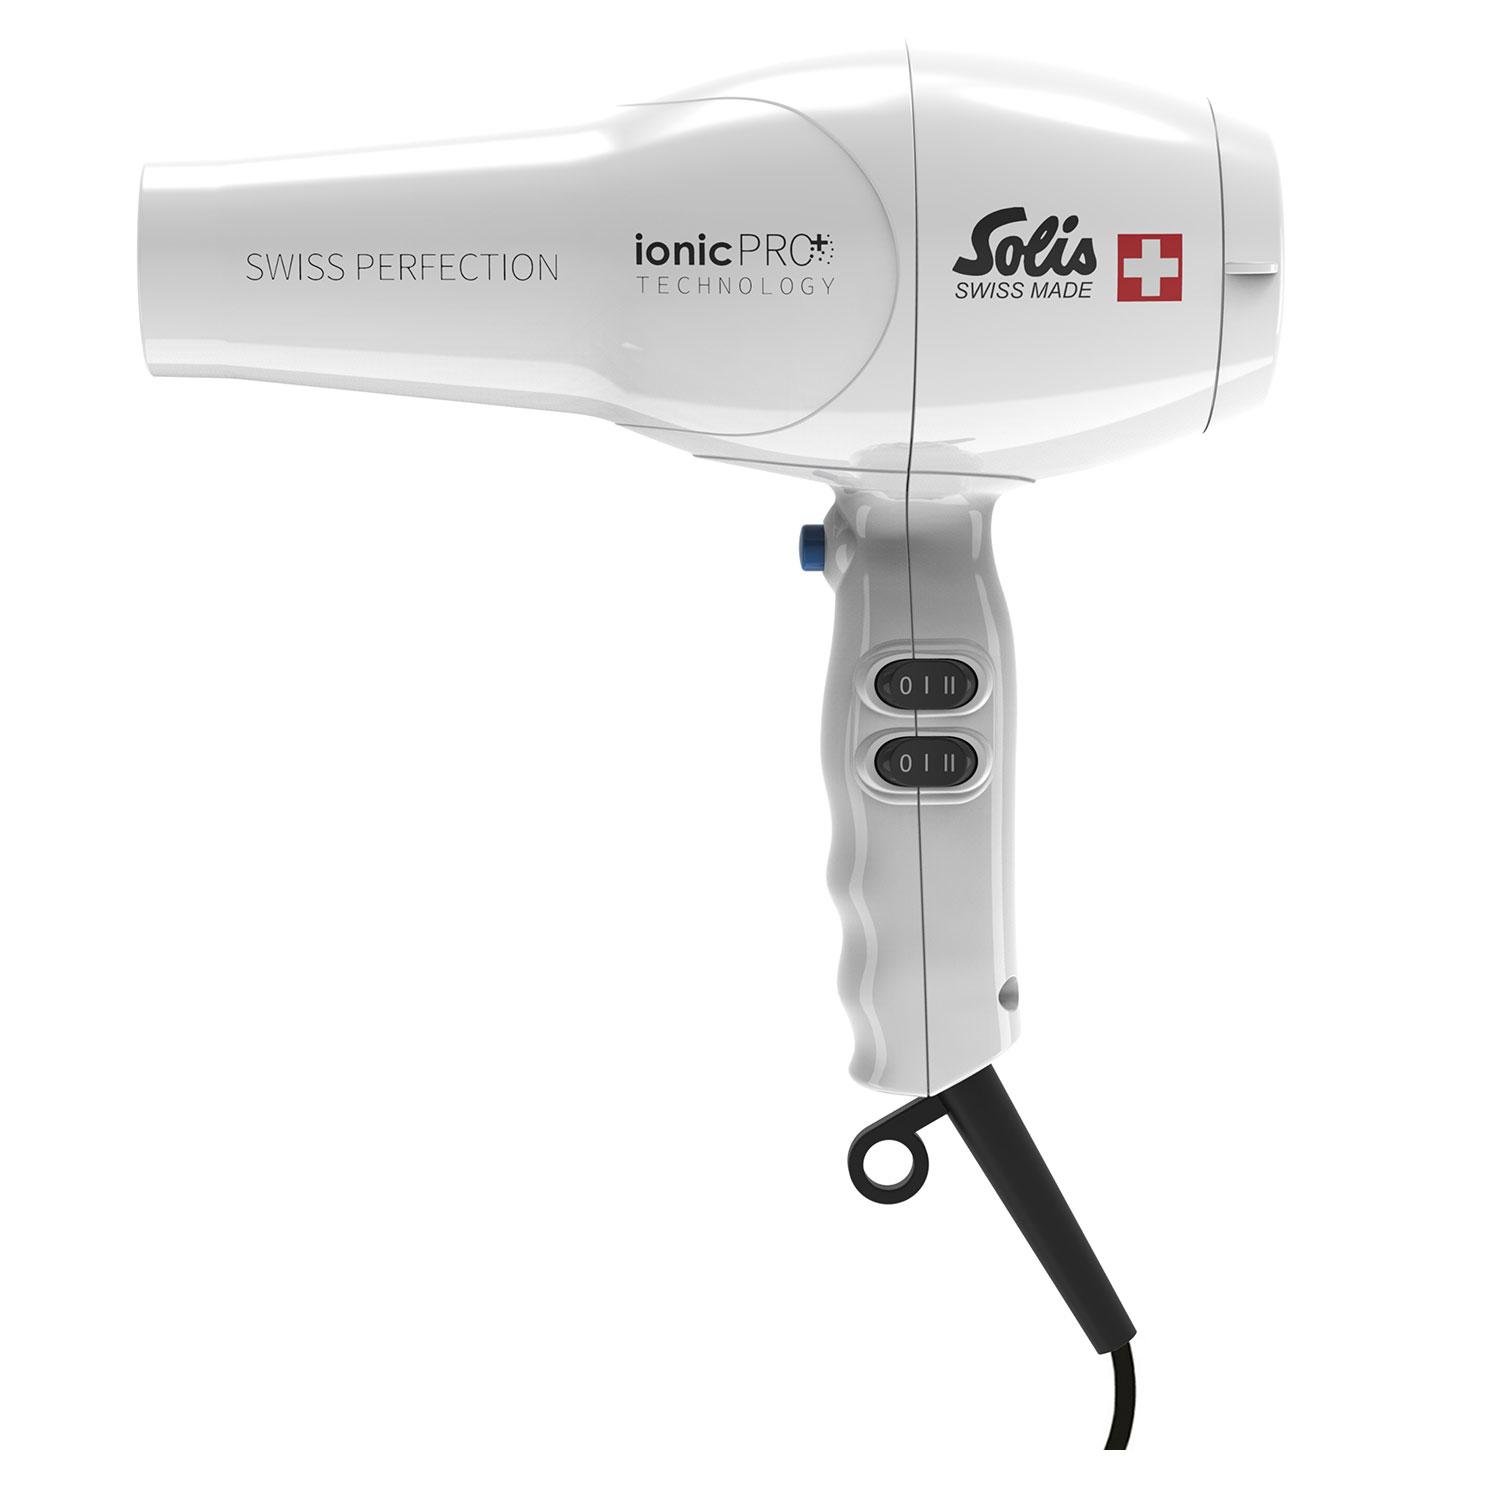 Solis - Swiss Perfection 360º ionicPRO White